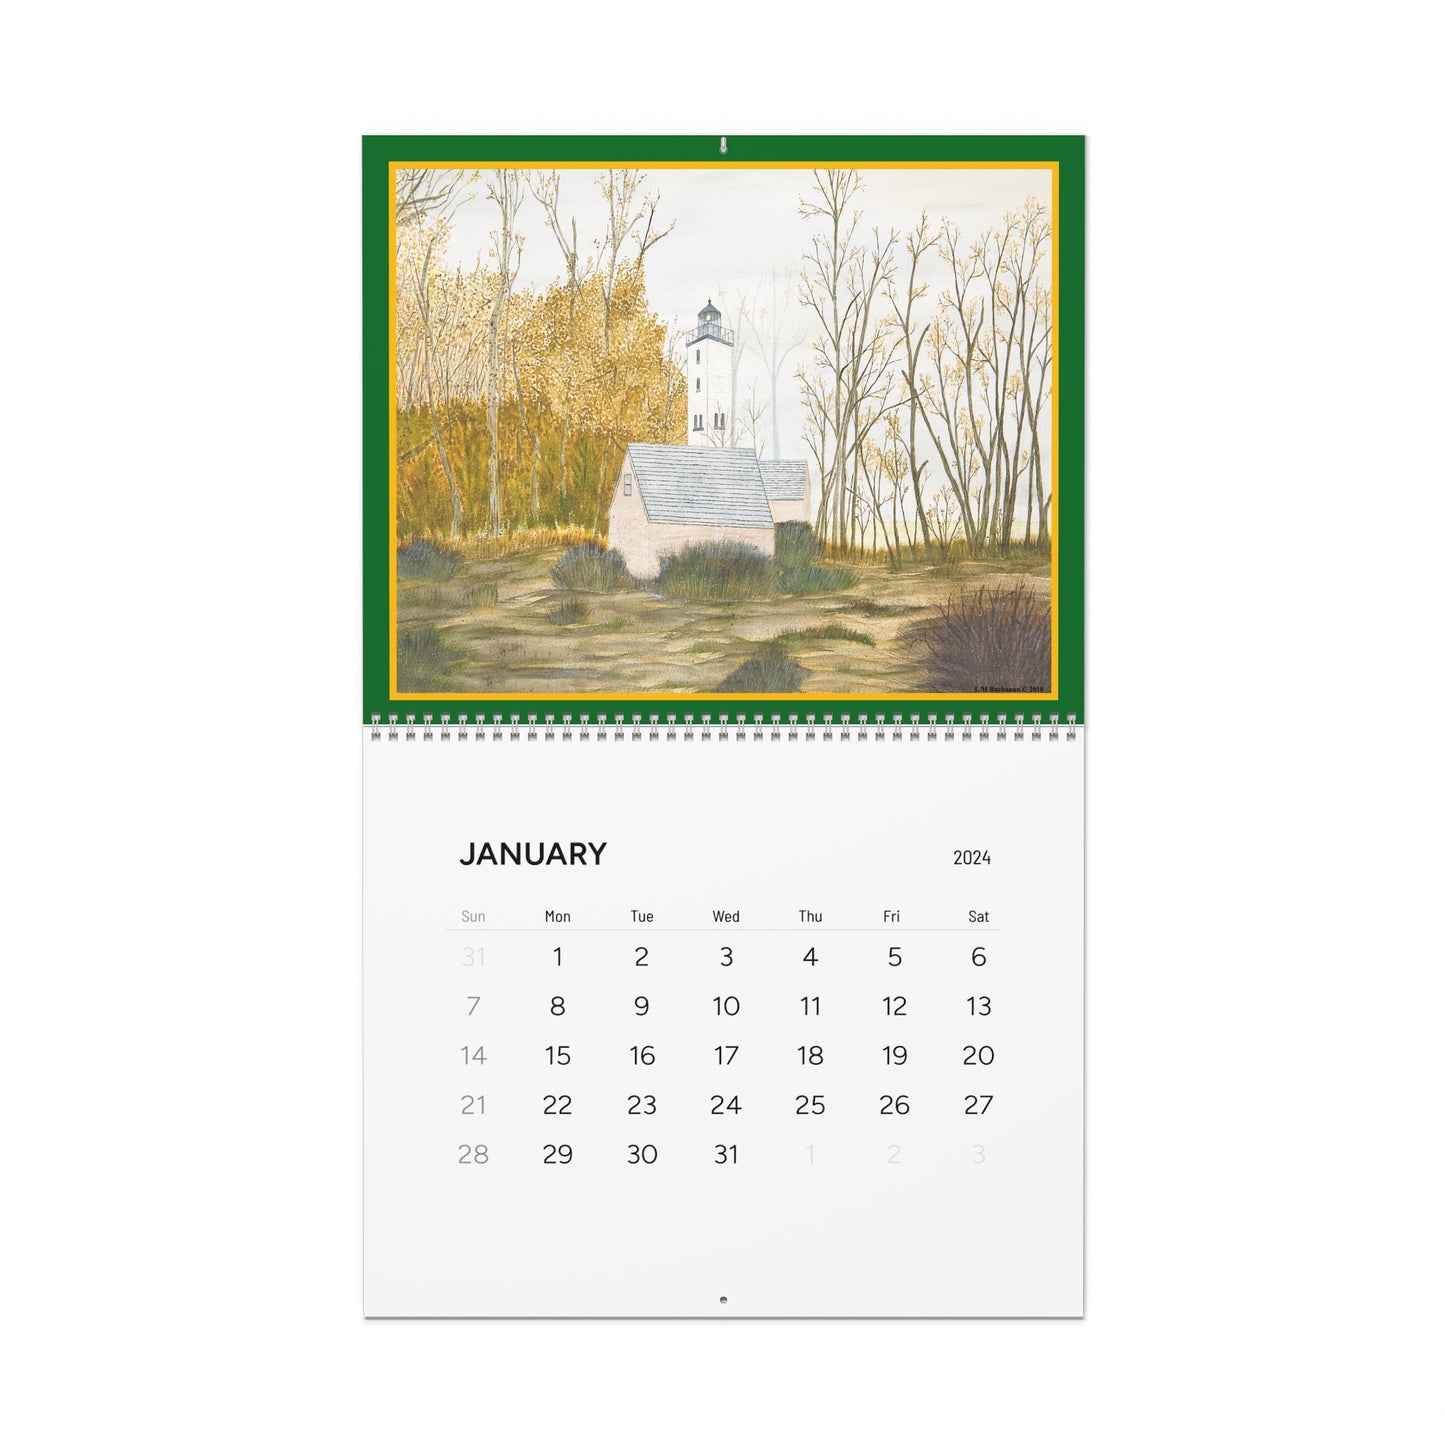 The Coast & Country All Seasons 2024 Wall Calendar includes reproductions of 12 stunning watercolors by artist Lee M. Buchanan. with ample room in the date blocks to record appointments or special events.  A beautiful calendar with collectable art prints!